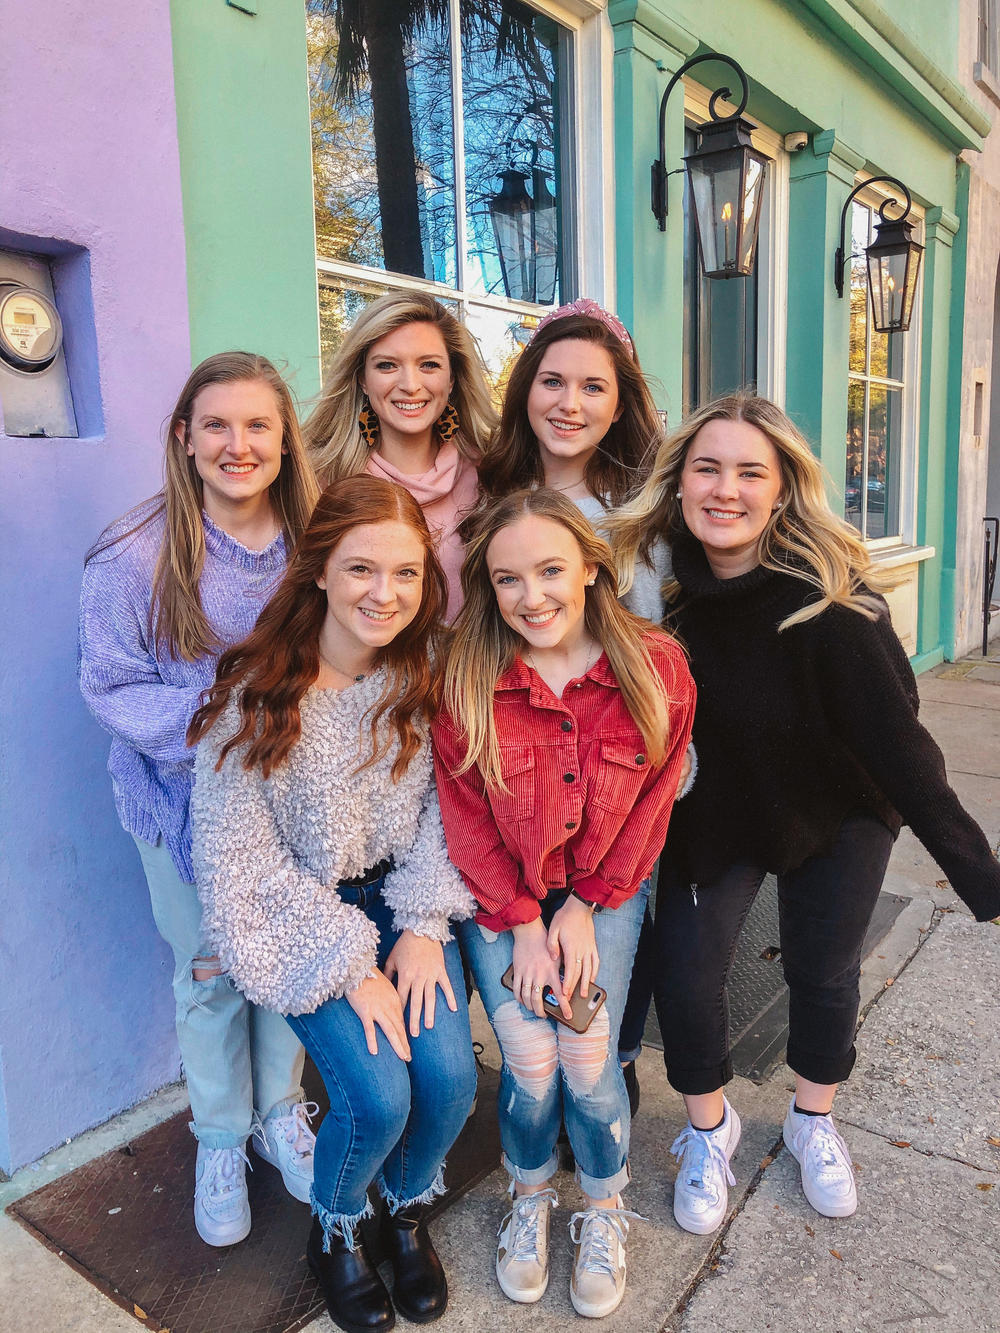 Taylor McInnis, pictured in the back row second to the left, is pictured with her sorority sisters of Zeta Tau Alpha from Georgia Southern.